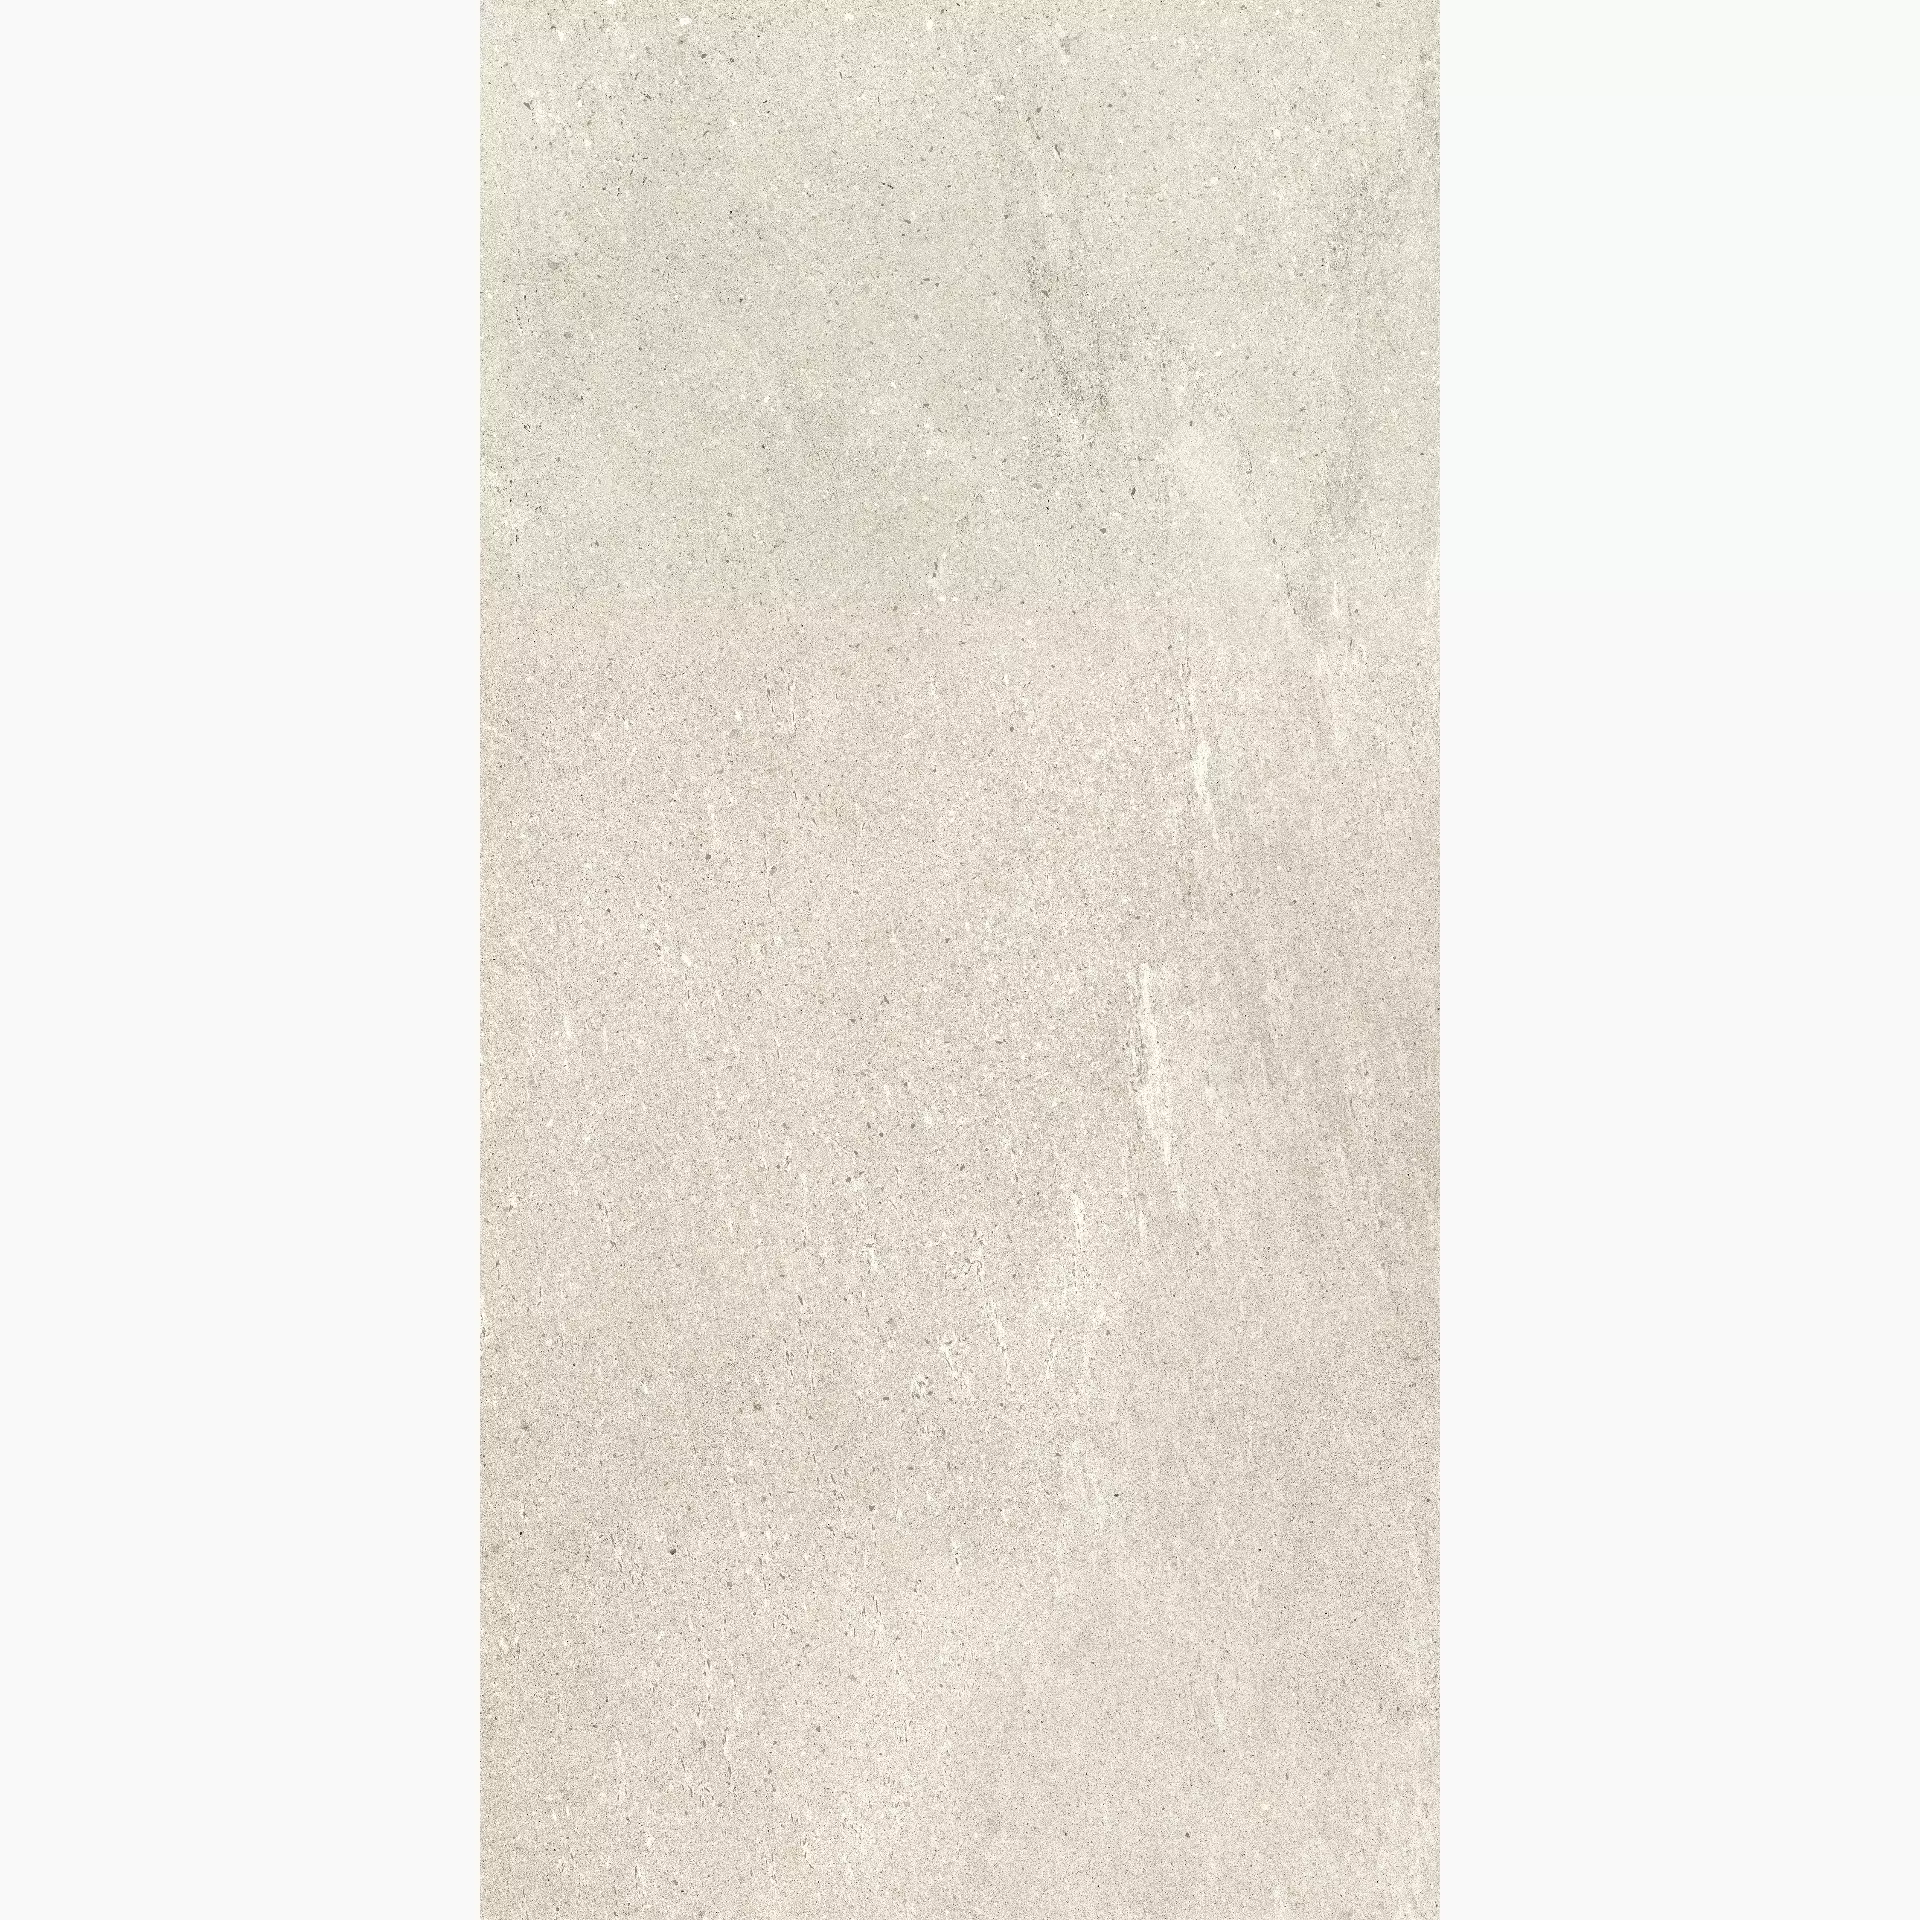 Cottodeste Blend Stone Clear Naturale Protect EGEBS00 90x180cm rectified 14mm